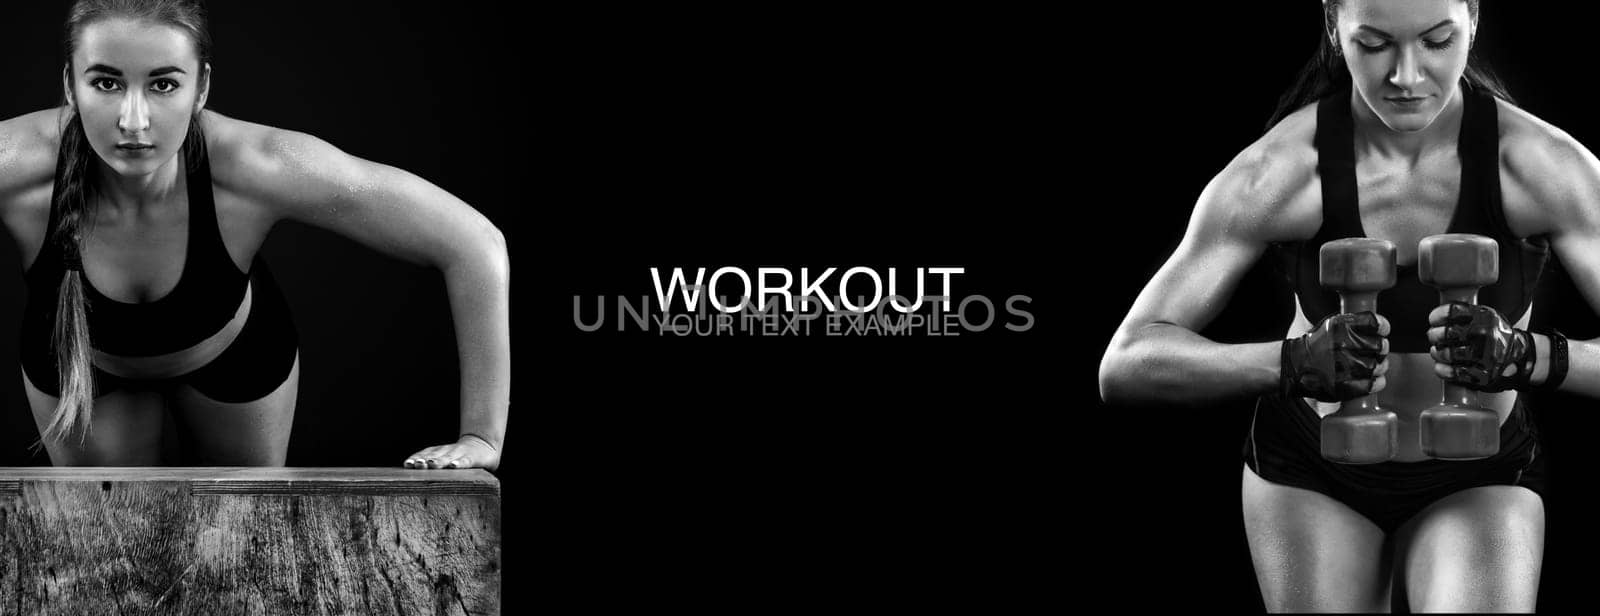 Sporty and fit woman with dumbbell exercising at black background to stay fit. Workout and fitness motivation. by MikeOrlov